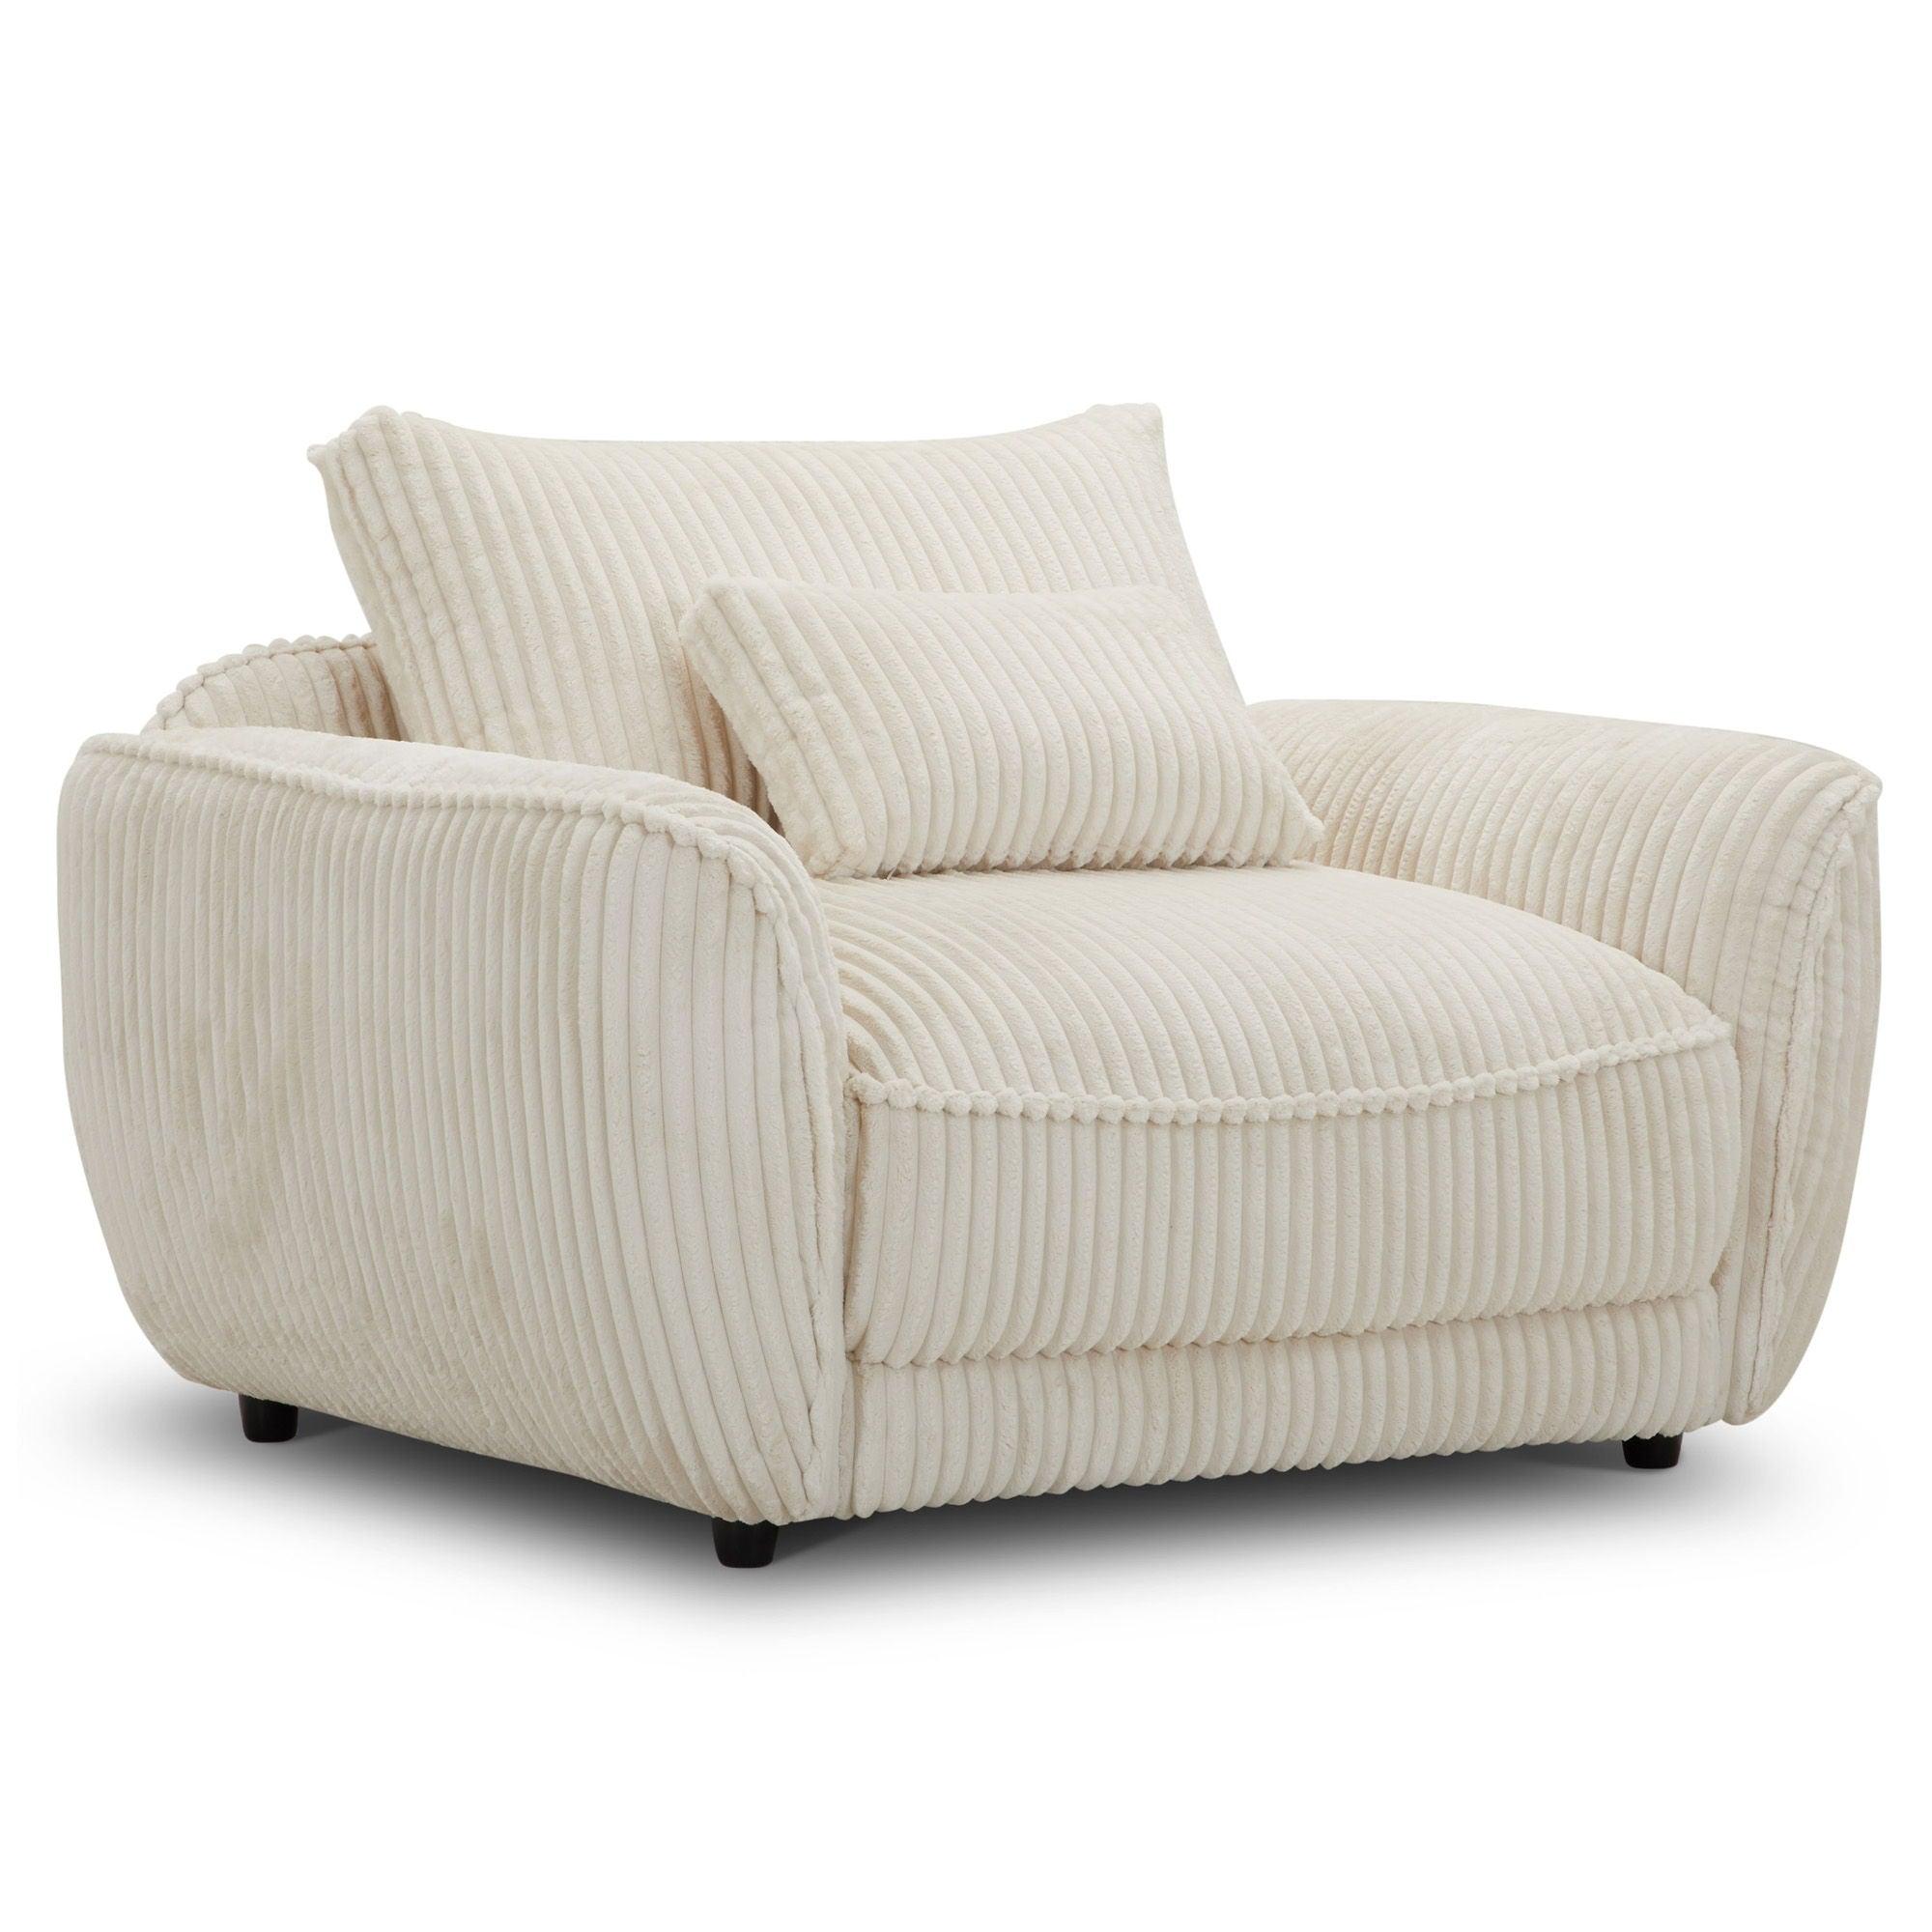 Parker Living - Utopia - Chair and A Half with Lumbar Pillow - Mega Ivory - 5th Avenue Furniture